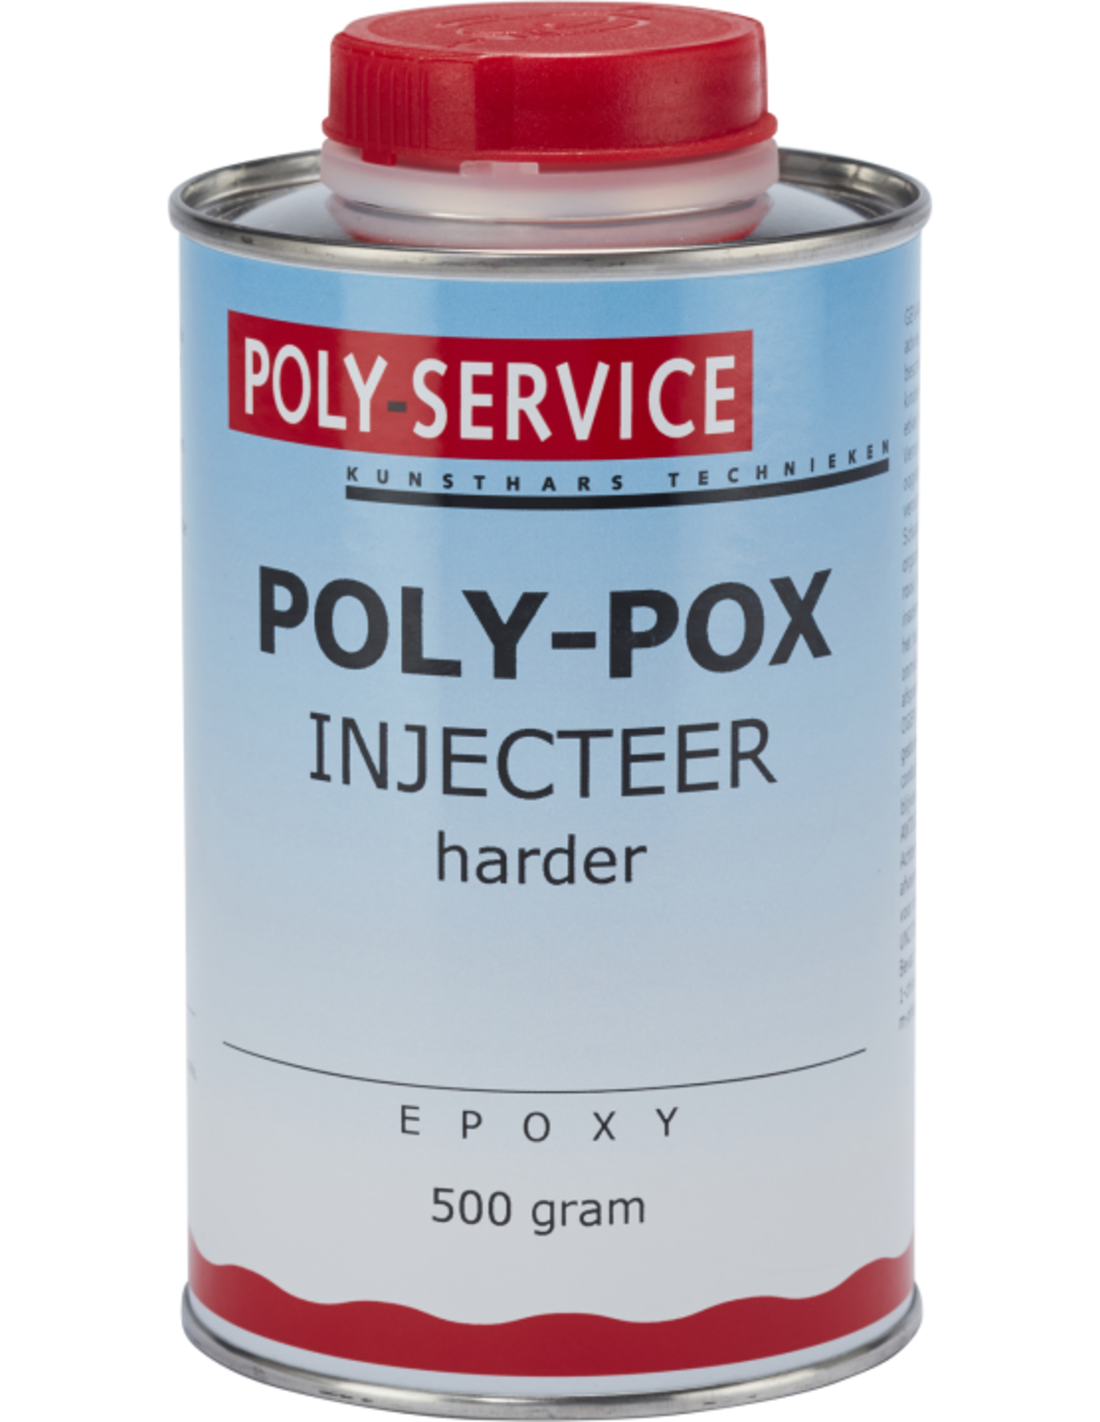 Poly-pox-injecteer-harder.png